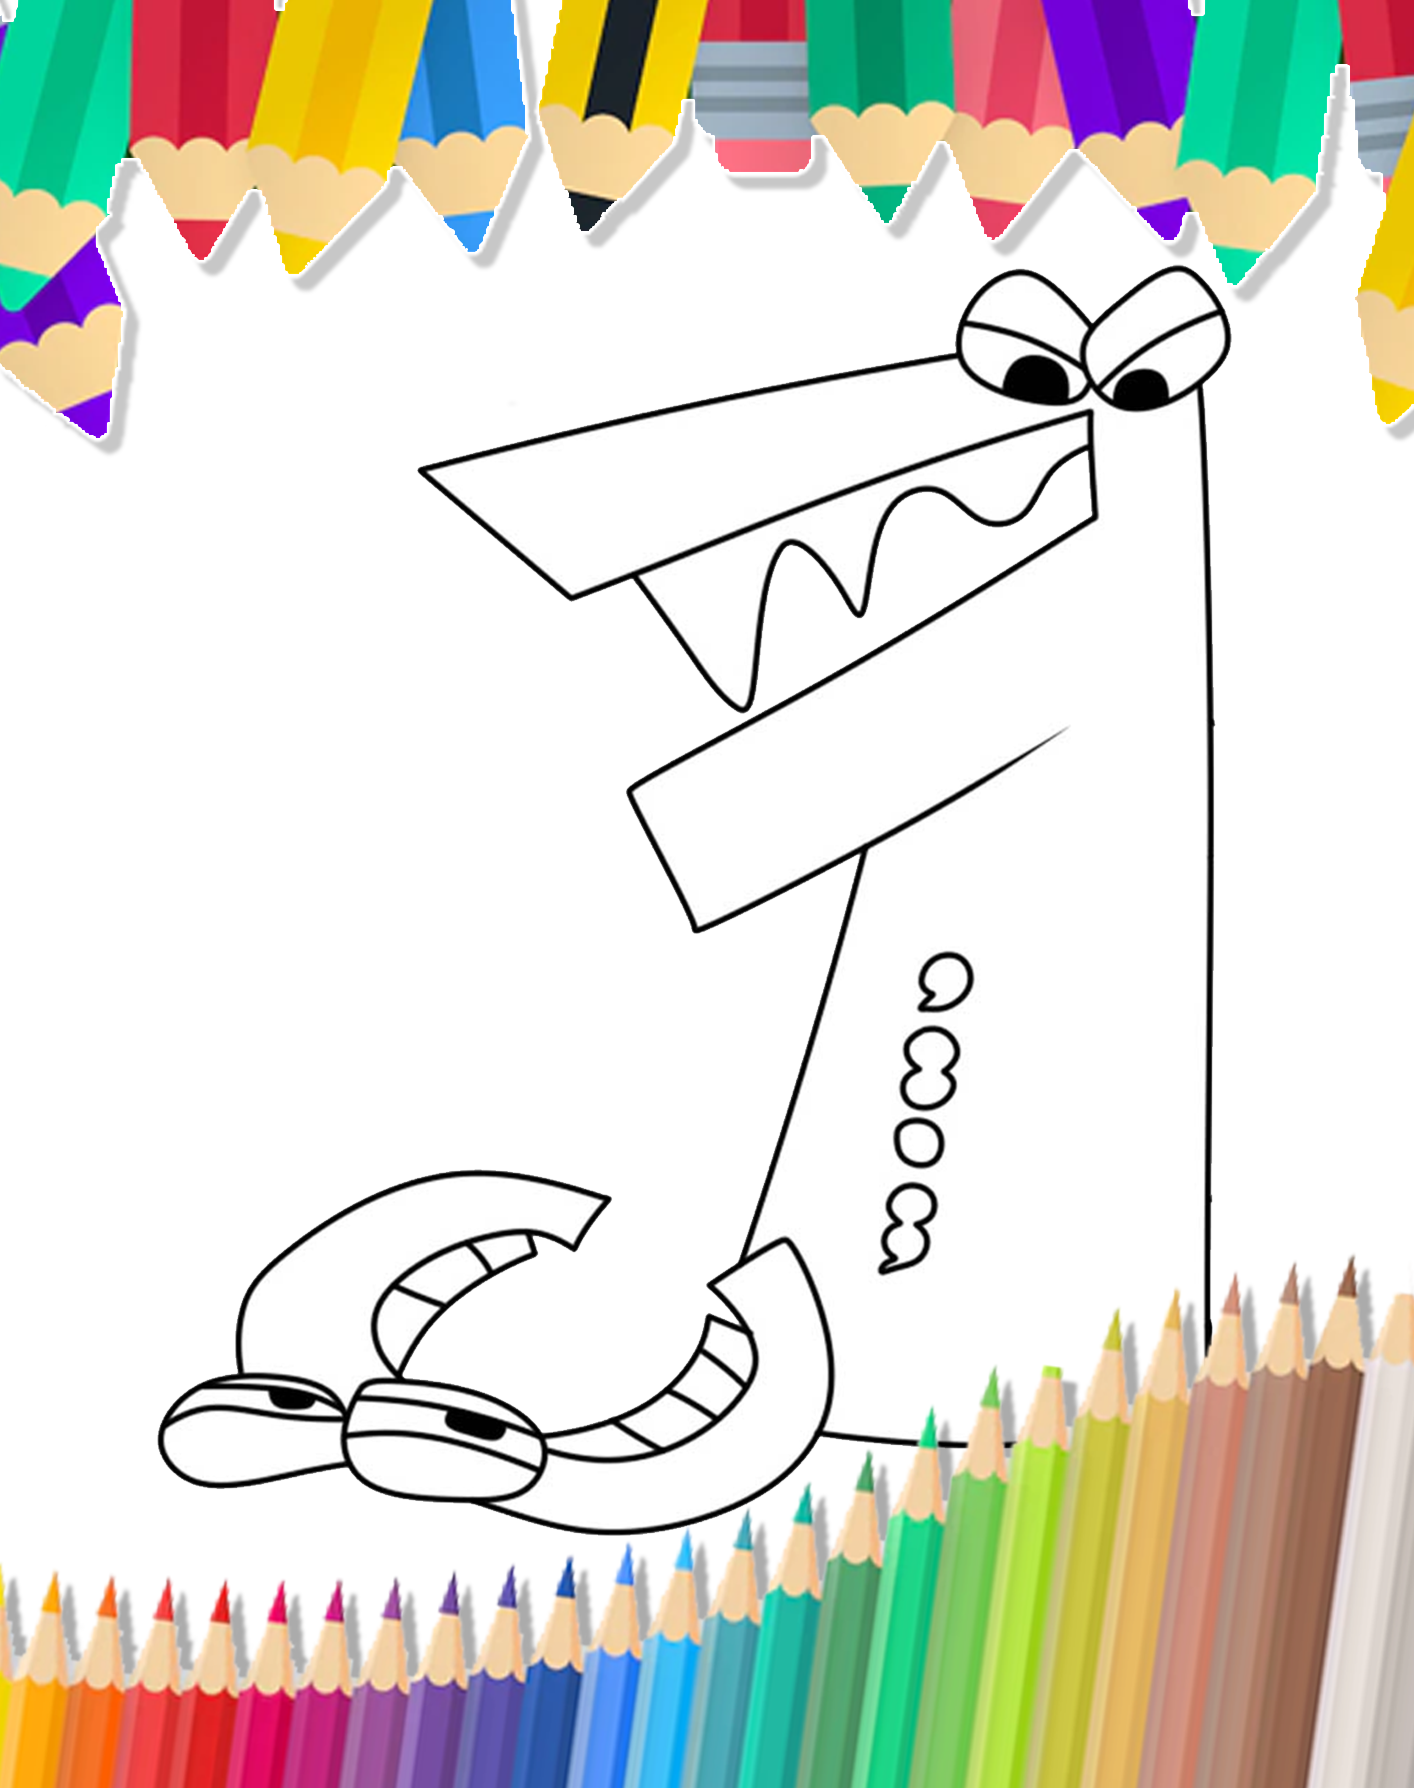 I Alphabet Lore Coloring Page  Coloring pages for kids, Coloring